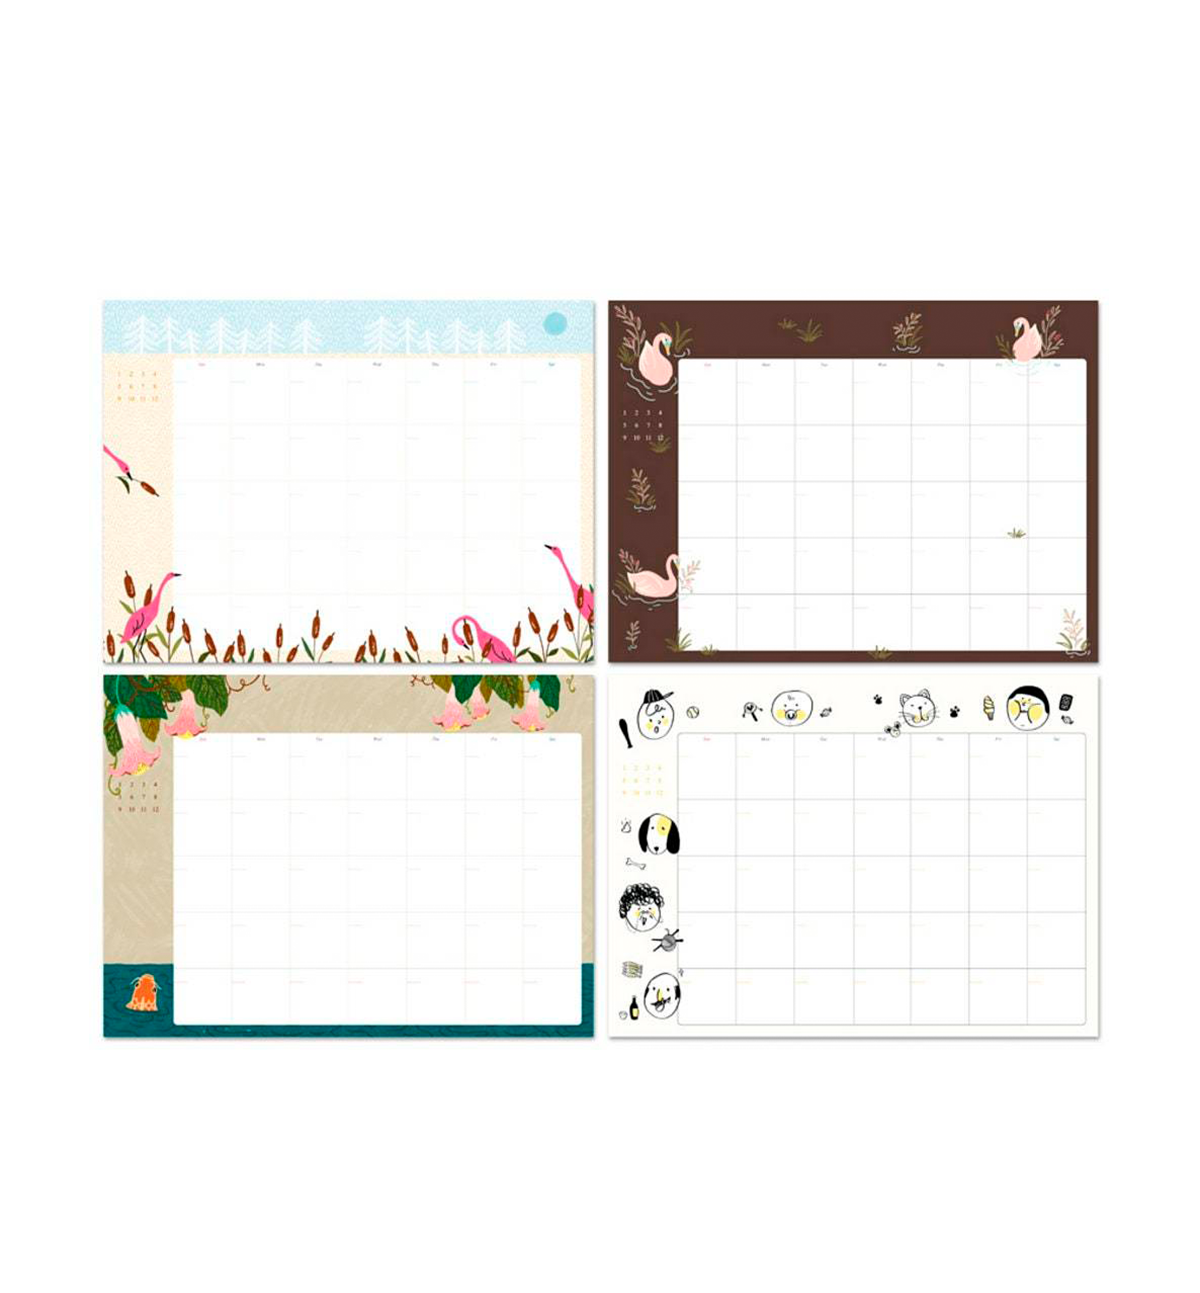 Undated Weekly Planner [Story Diary]